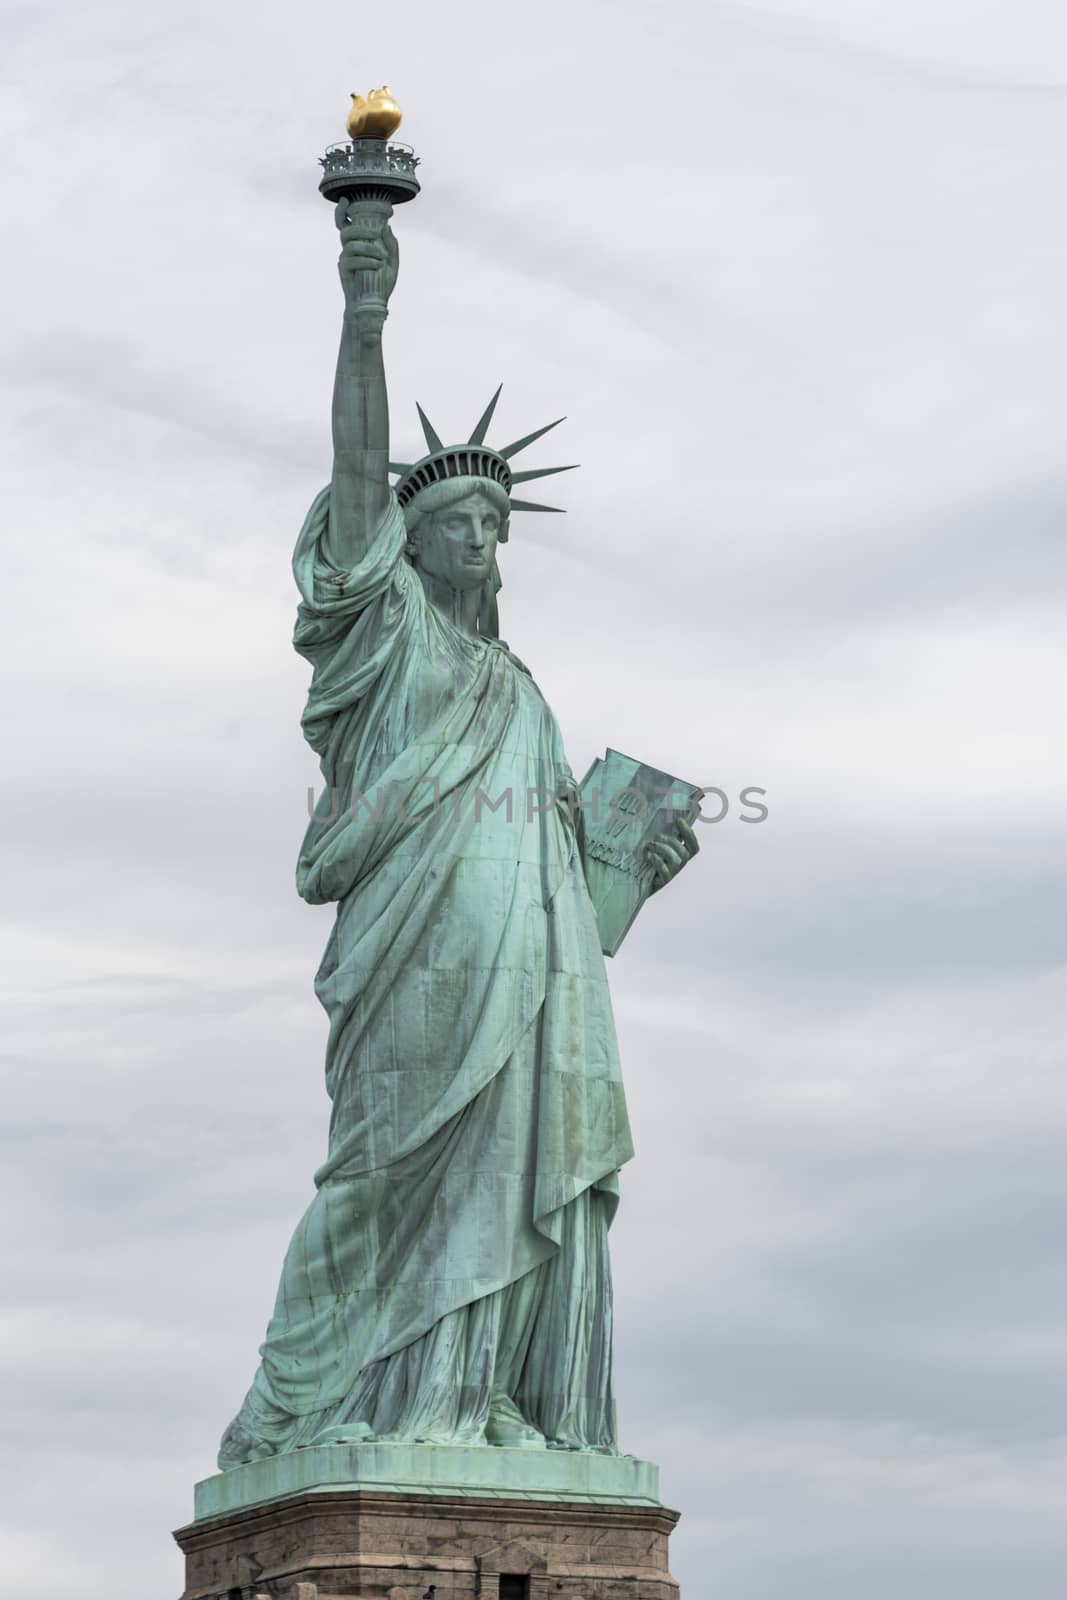 USA, New York - May 2019: Statue of Liberty, Liberty Island against an overcast sky